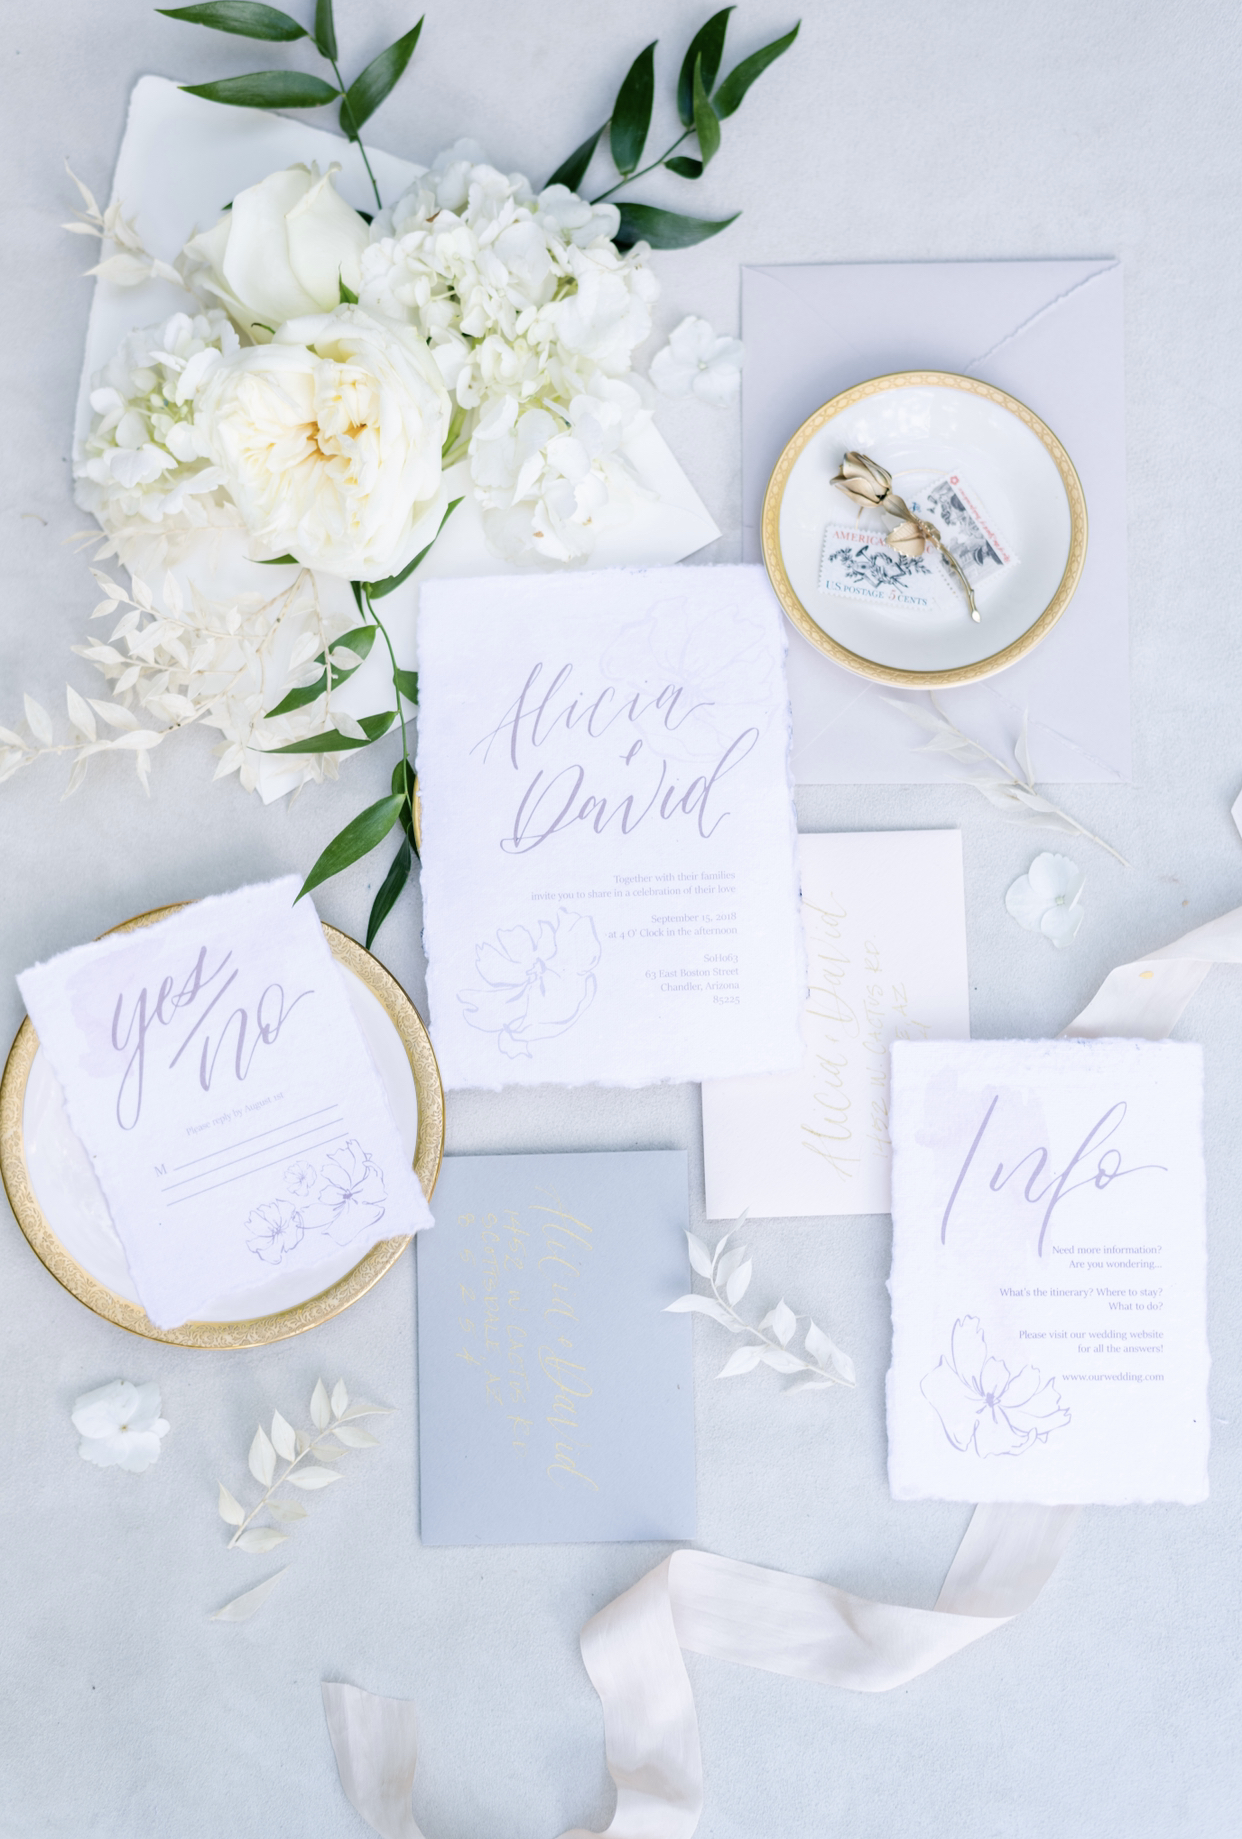 Wedding invitations with ceremony time